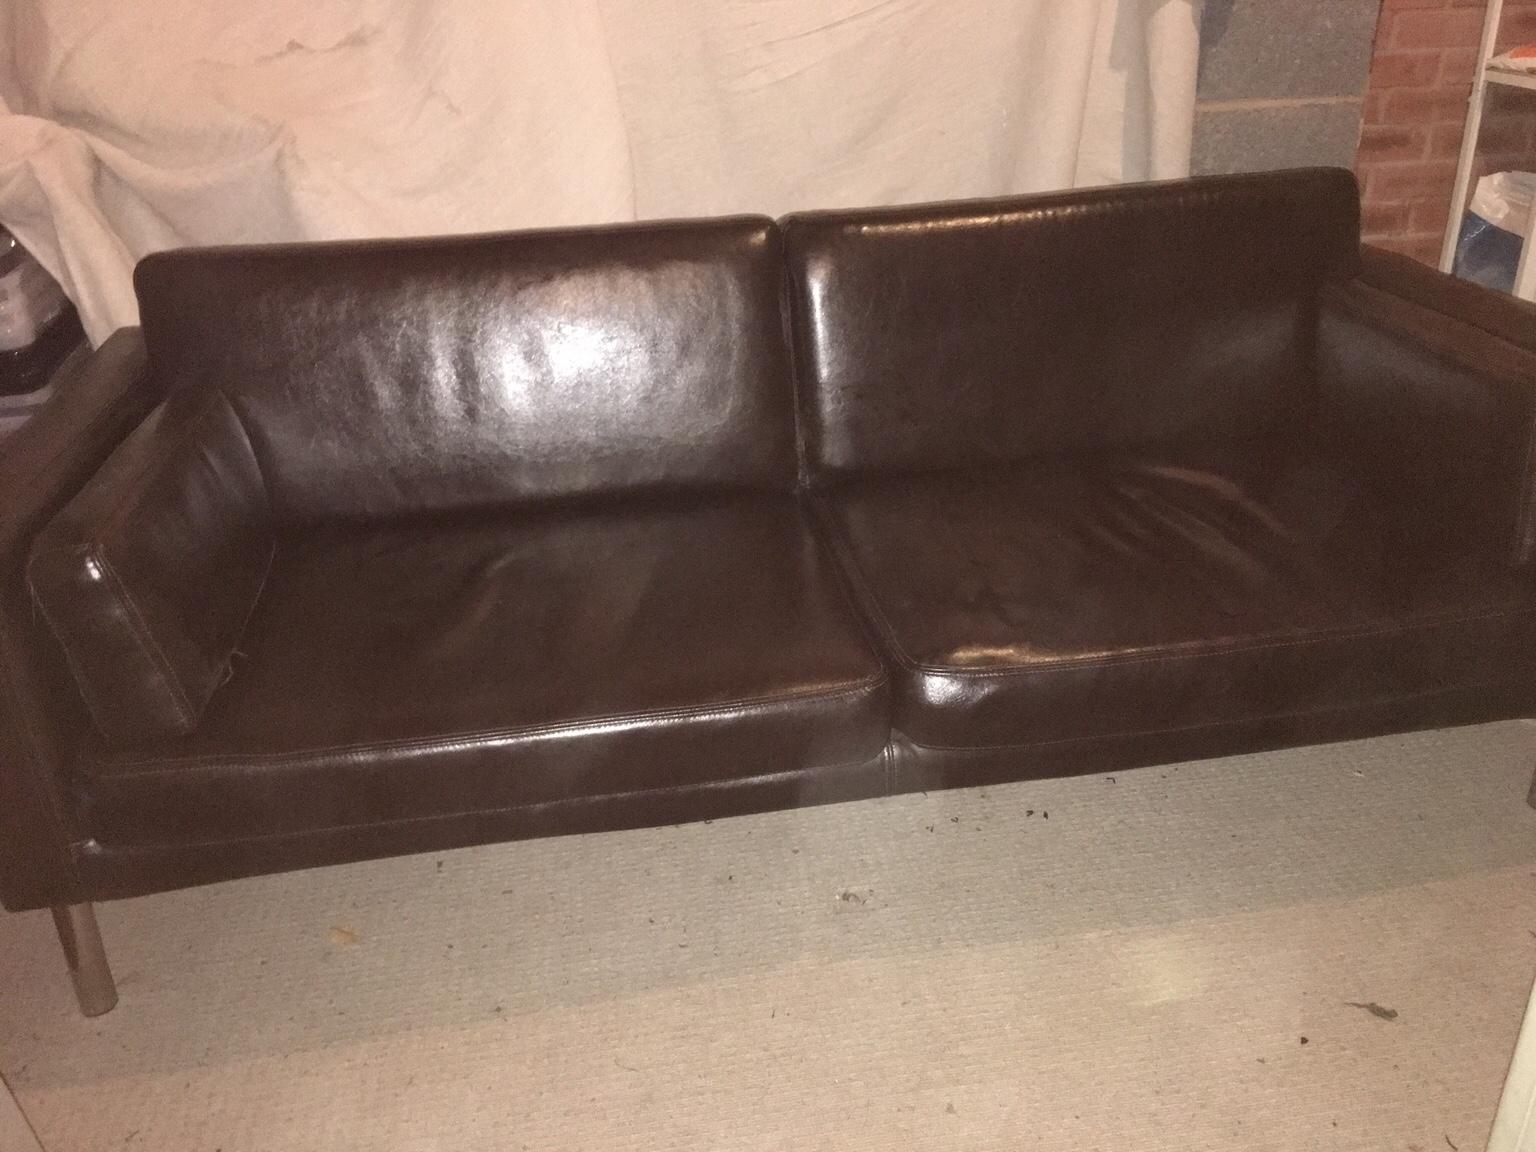 Faux Leather Sofa Ikea In Dy1 Dudley, Ikea Brown Leather Couch